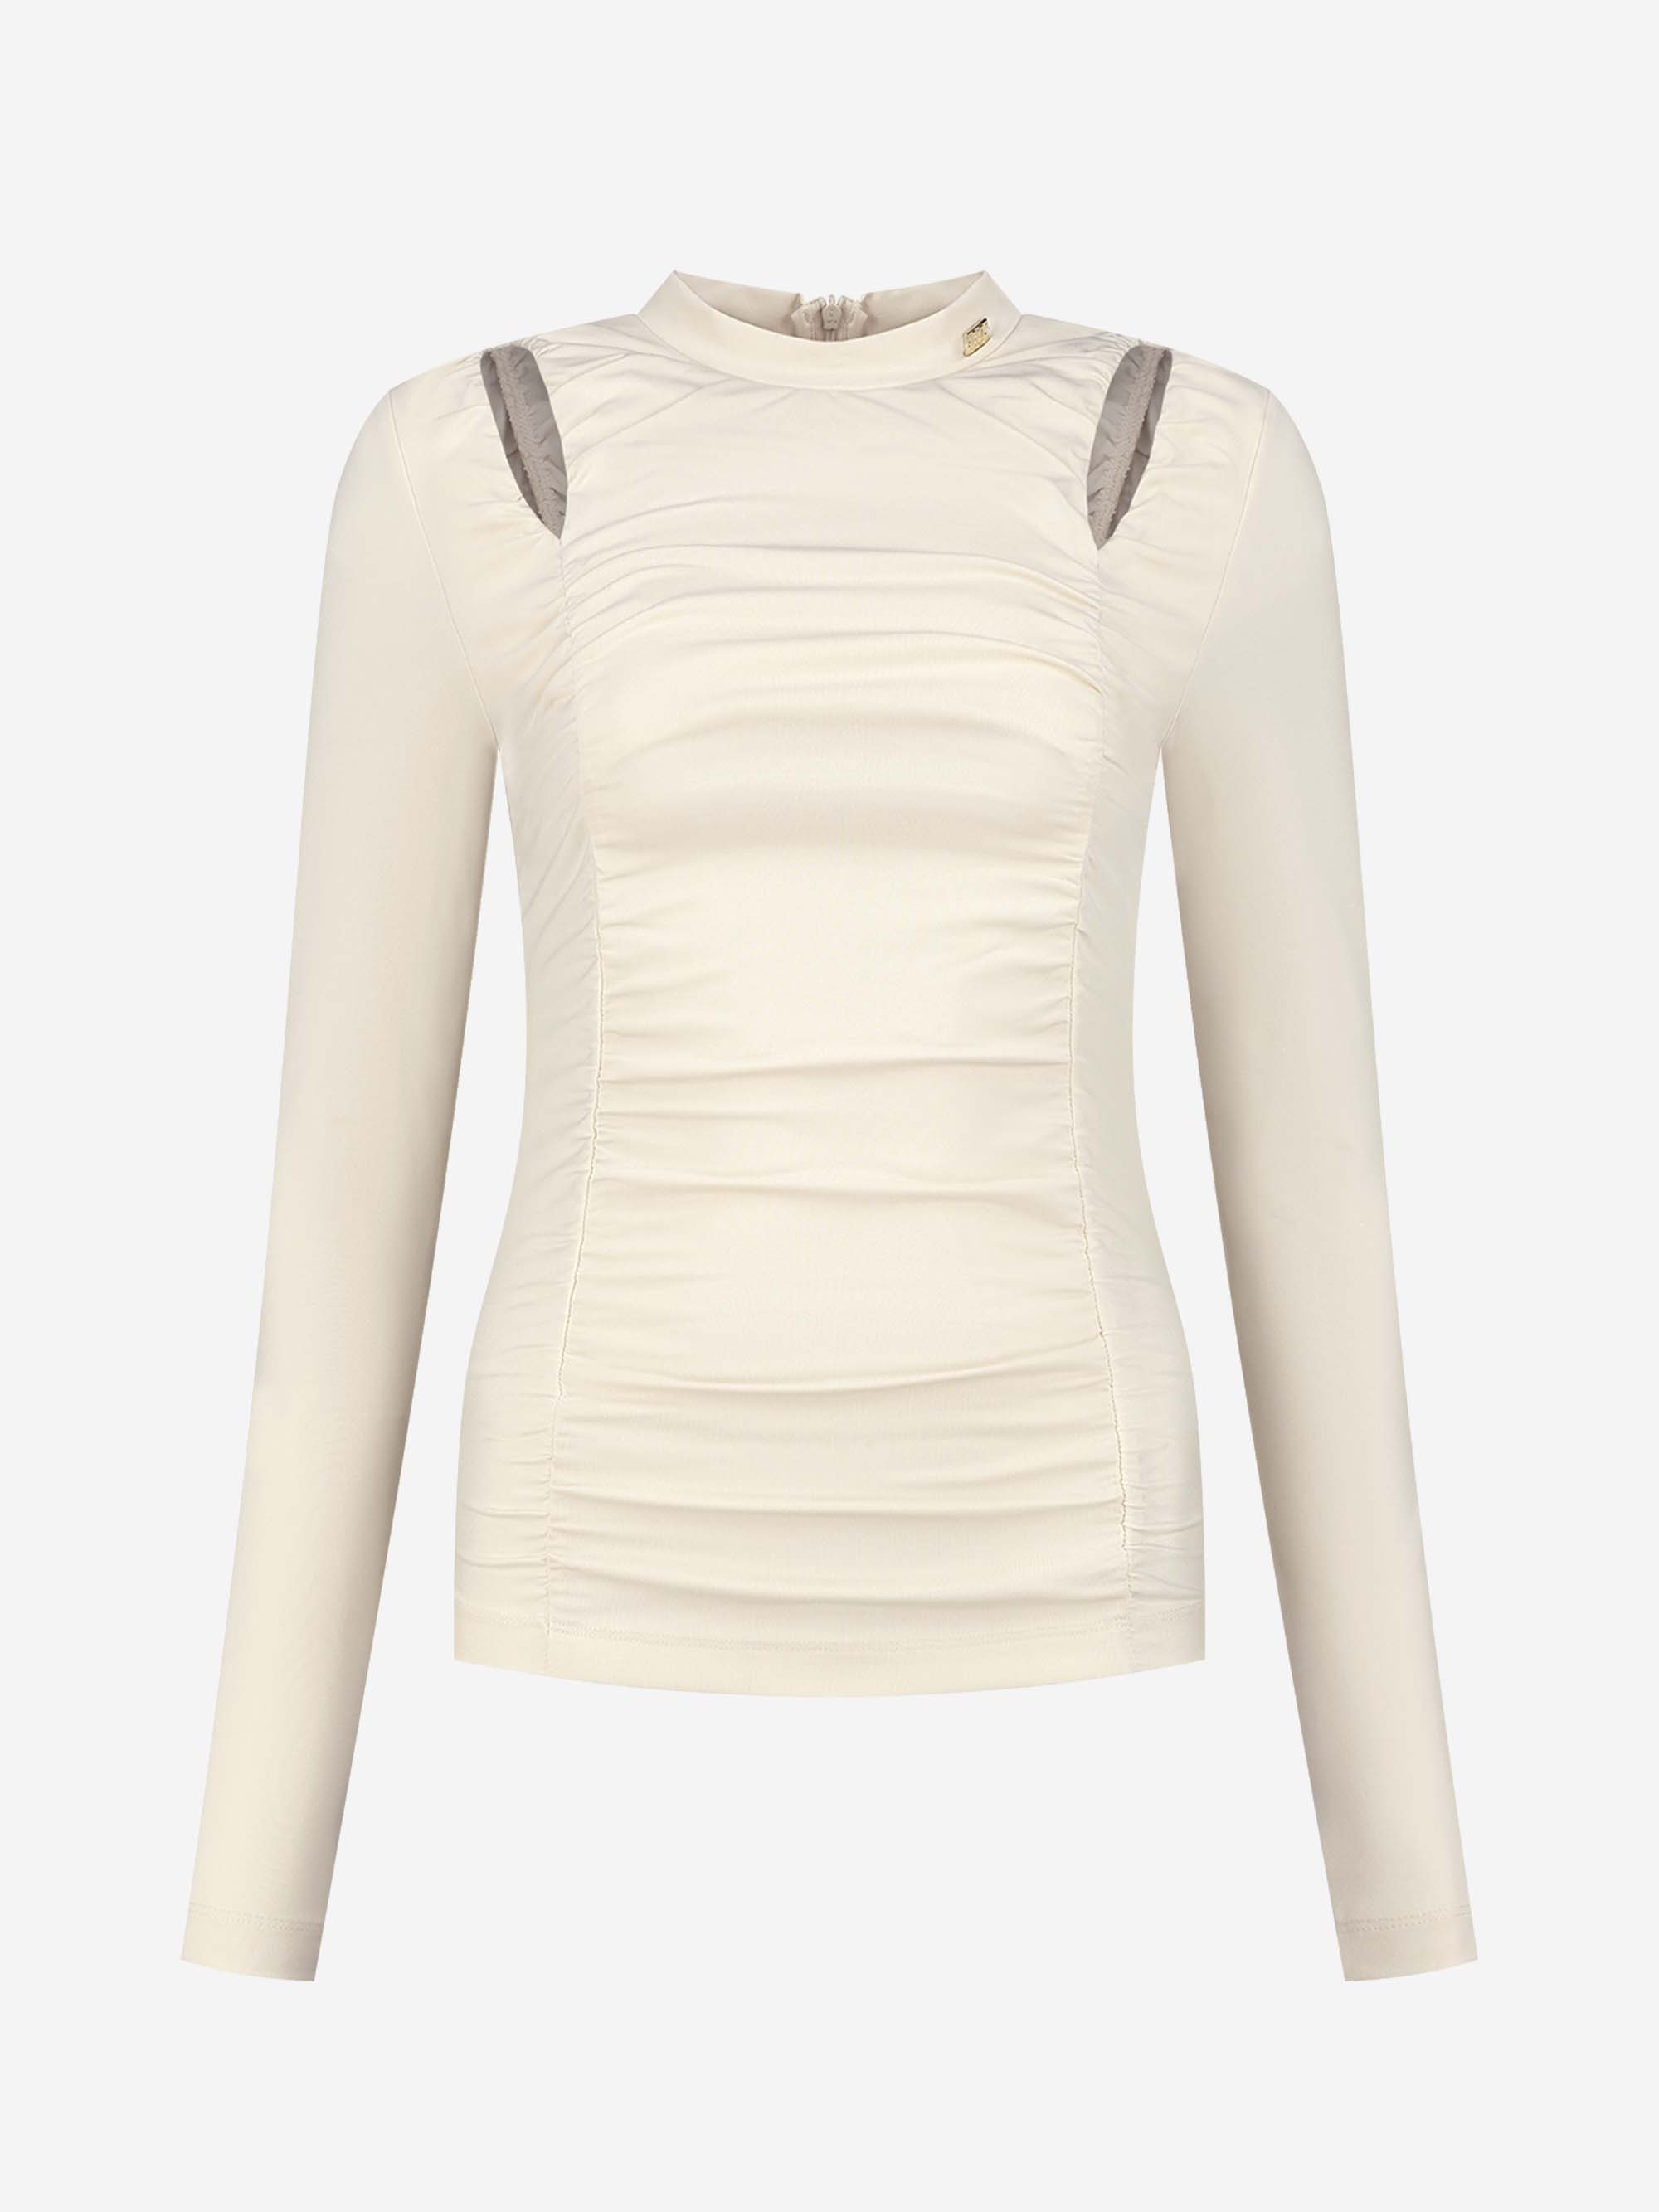  Fitted pleated top with v-neckline